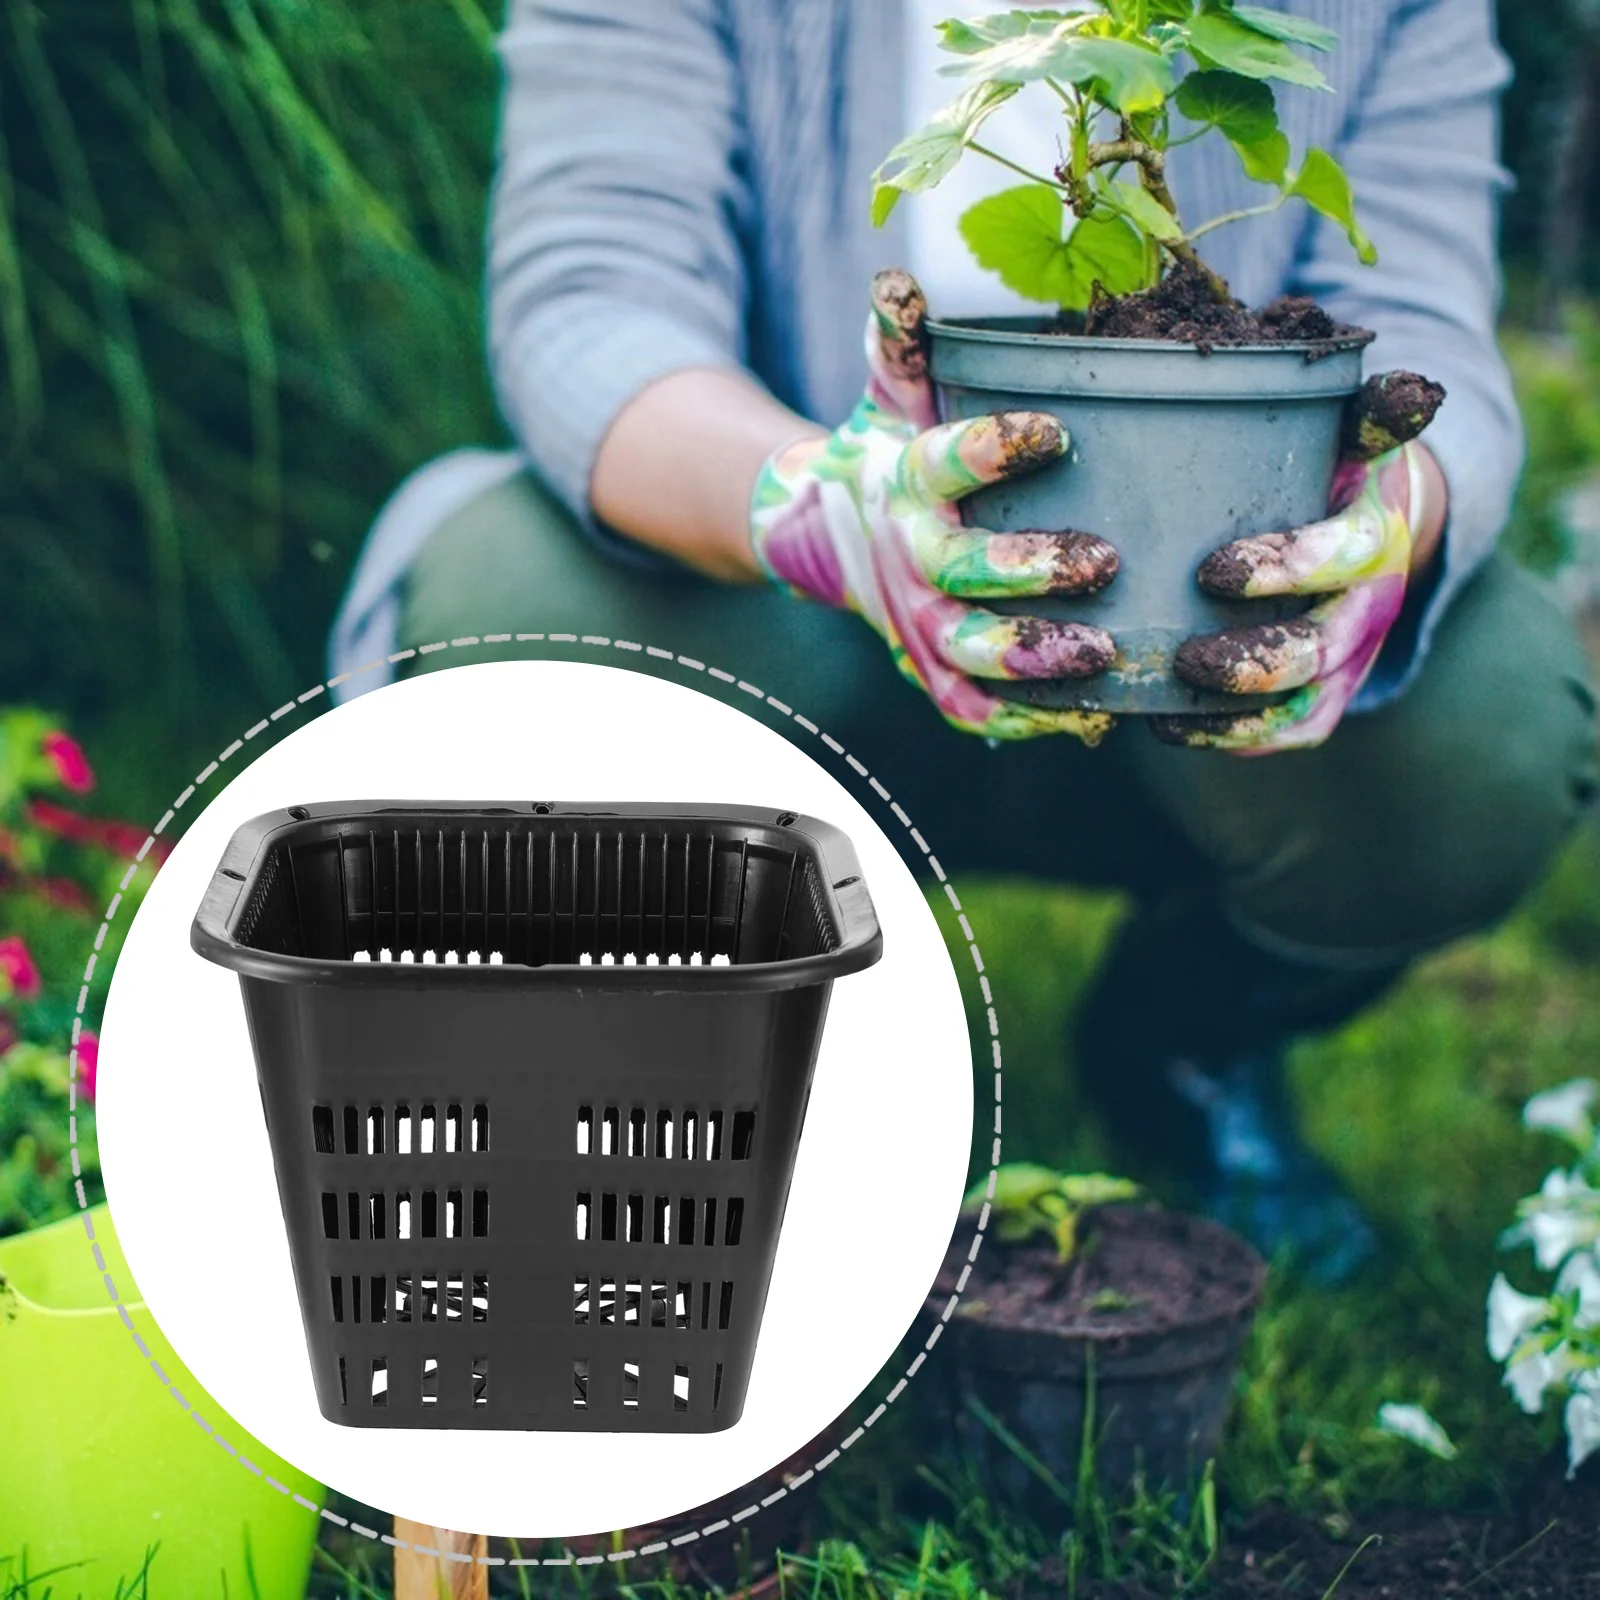 

12 Pcs Orchid Pots Holes Ornament Container Hydroponic Bucket Black Hamper Net Cup Growing Slotted Tree Rooting Box